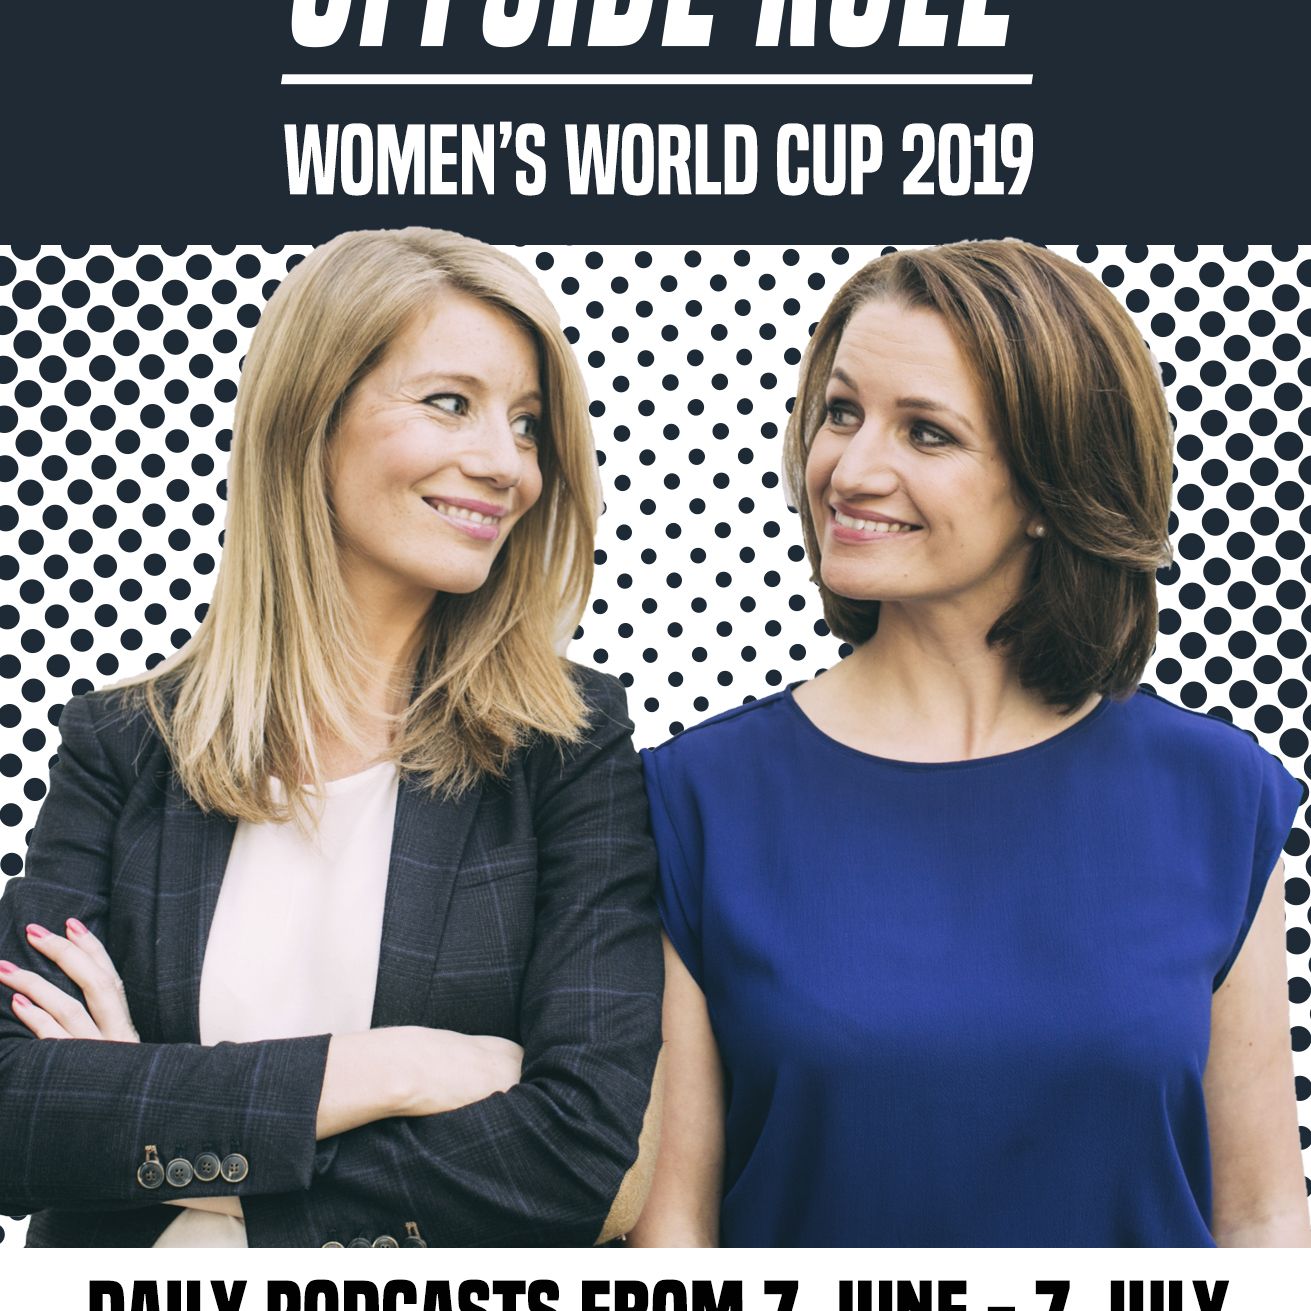 The Offside Rule: Women's World Cup Edition